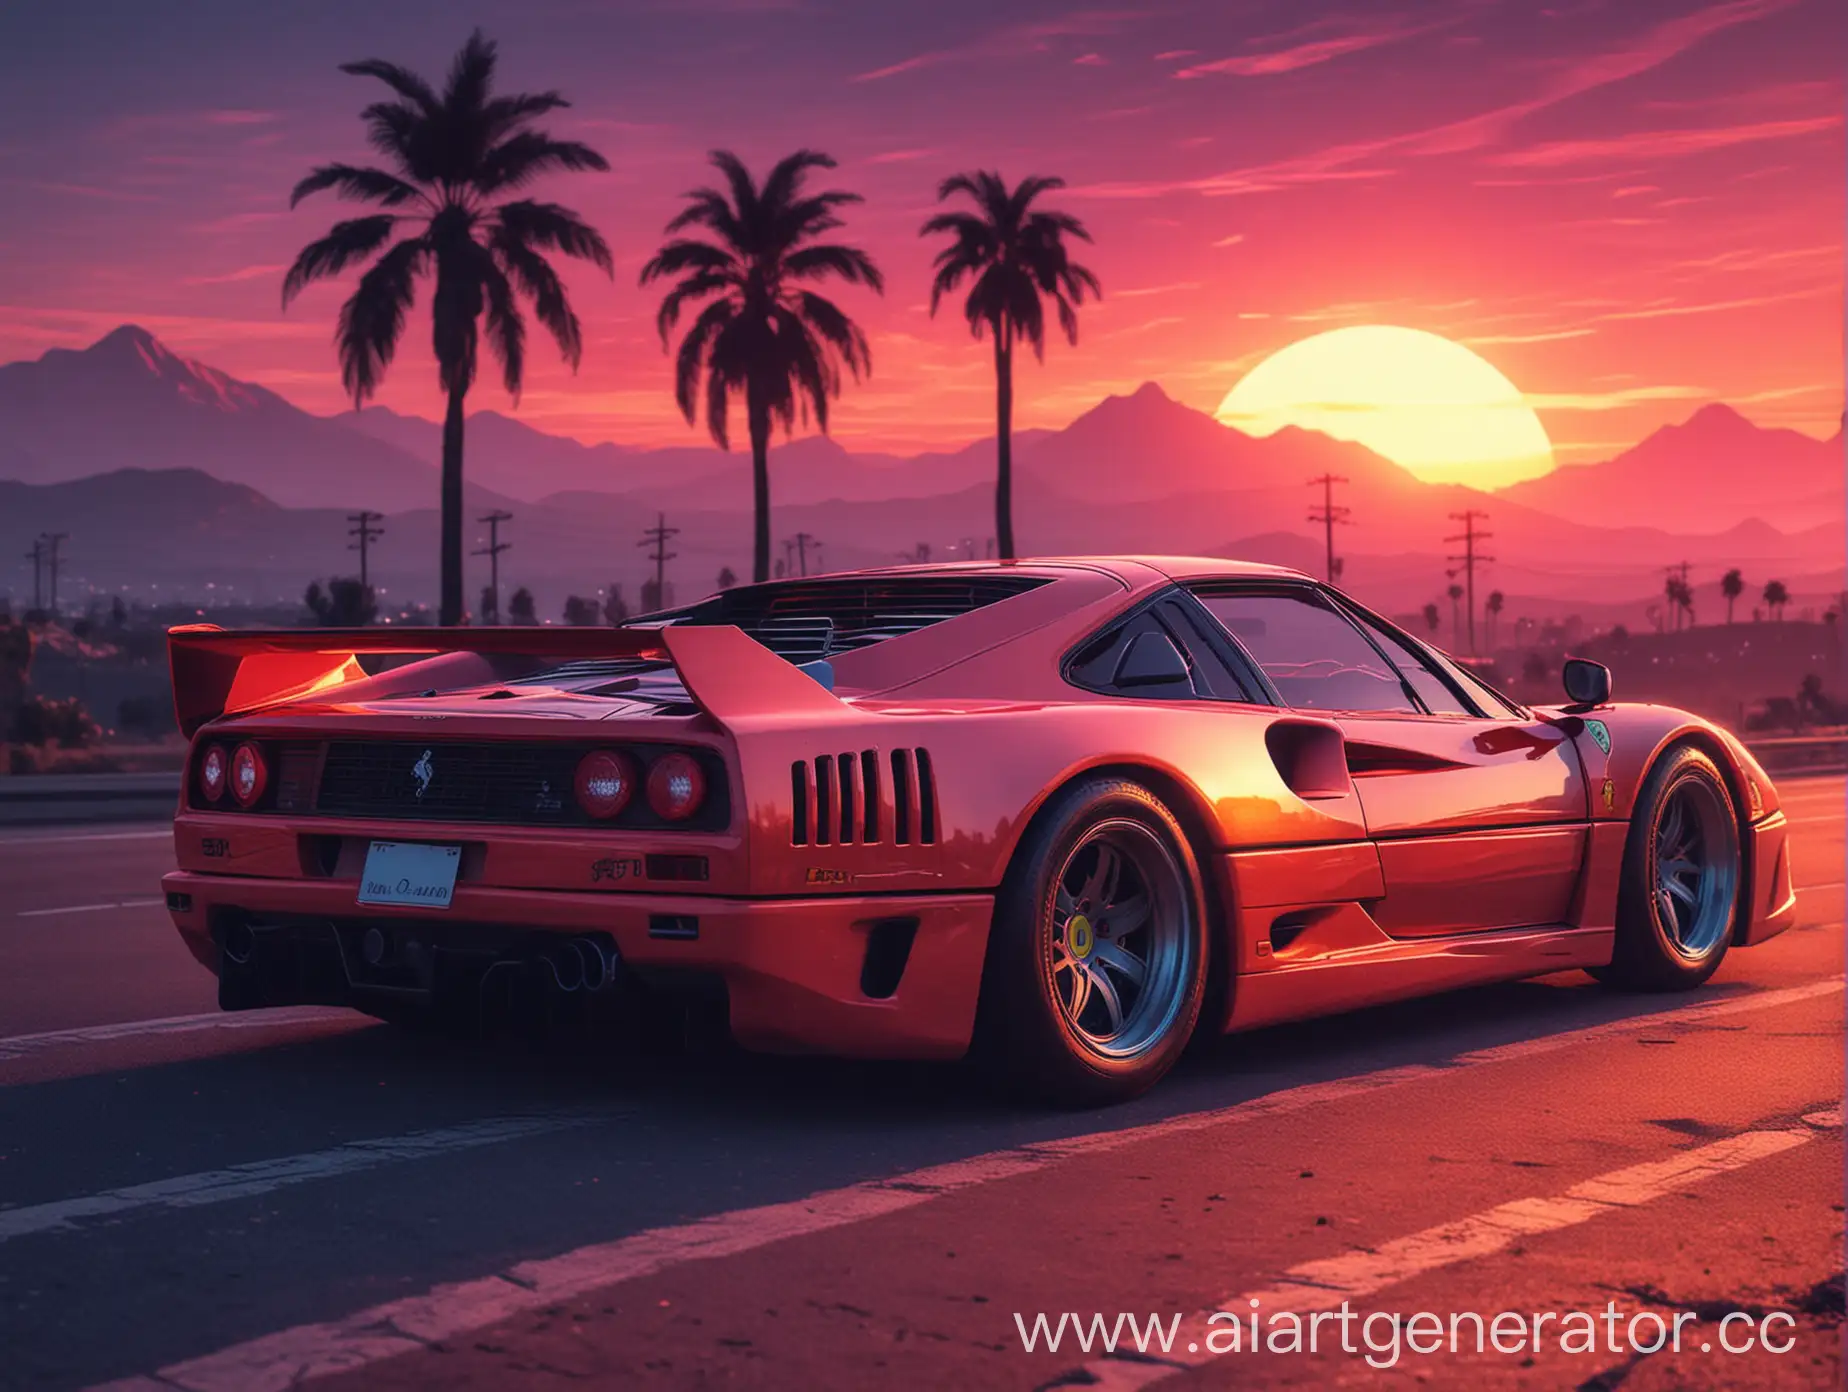 synthwave style, ferrari f40, retrowave sunset at the background